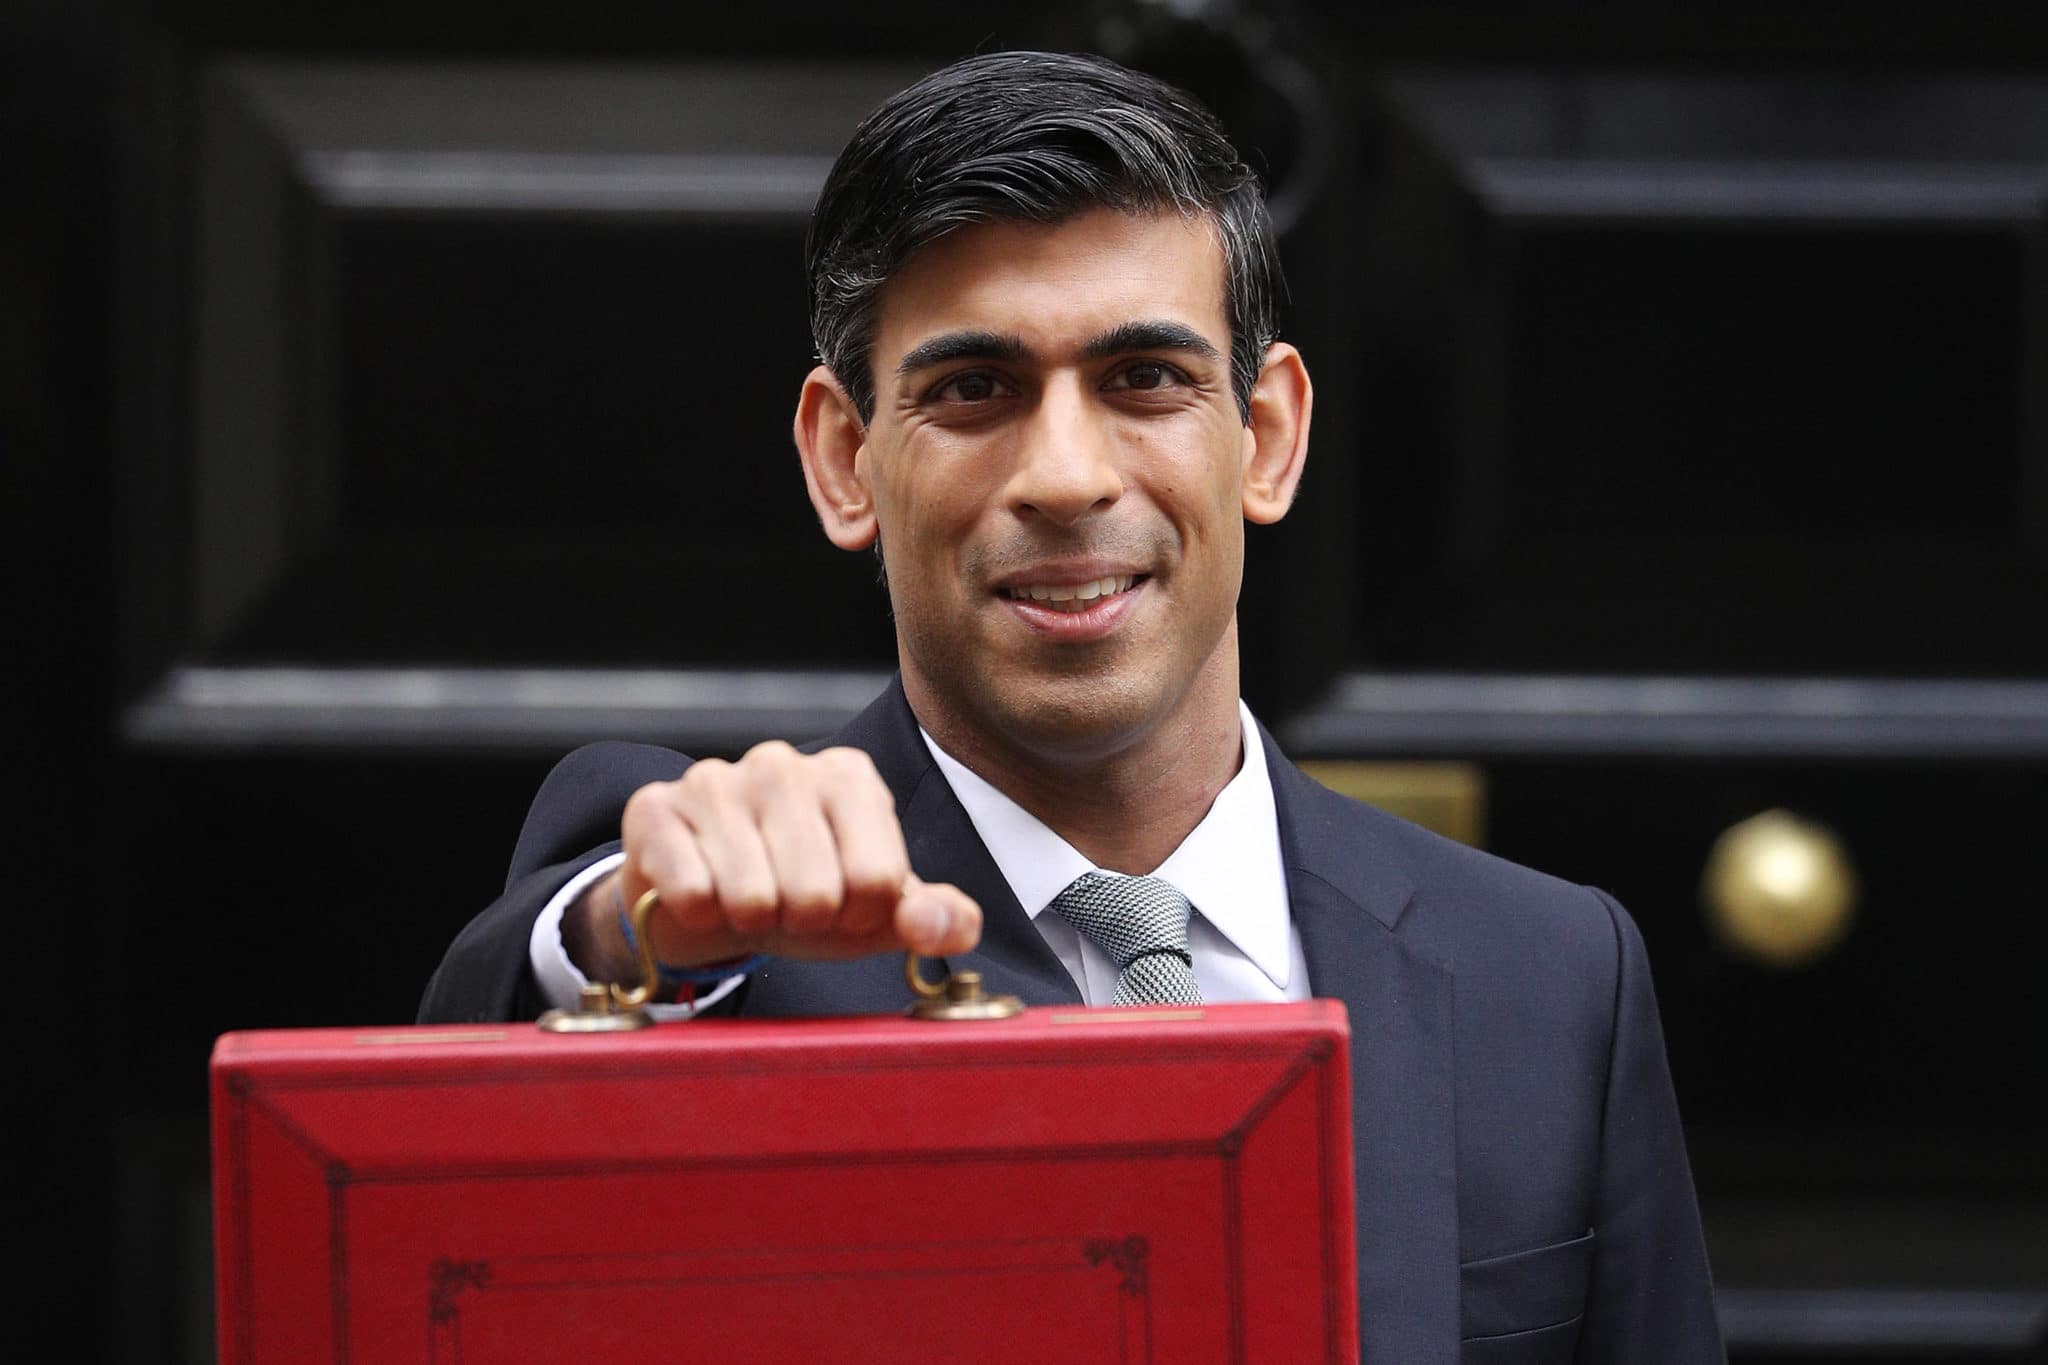 Chancellor Rishi Sunak's cuts to the aid budget must not undermine work on HIV/AIDS